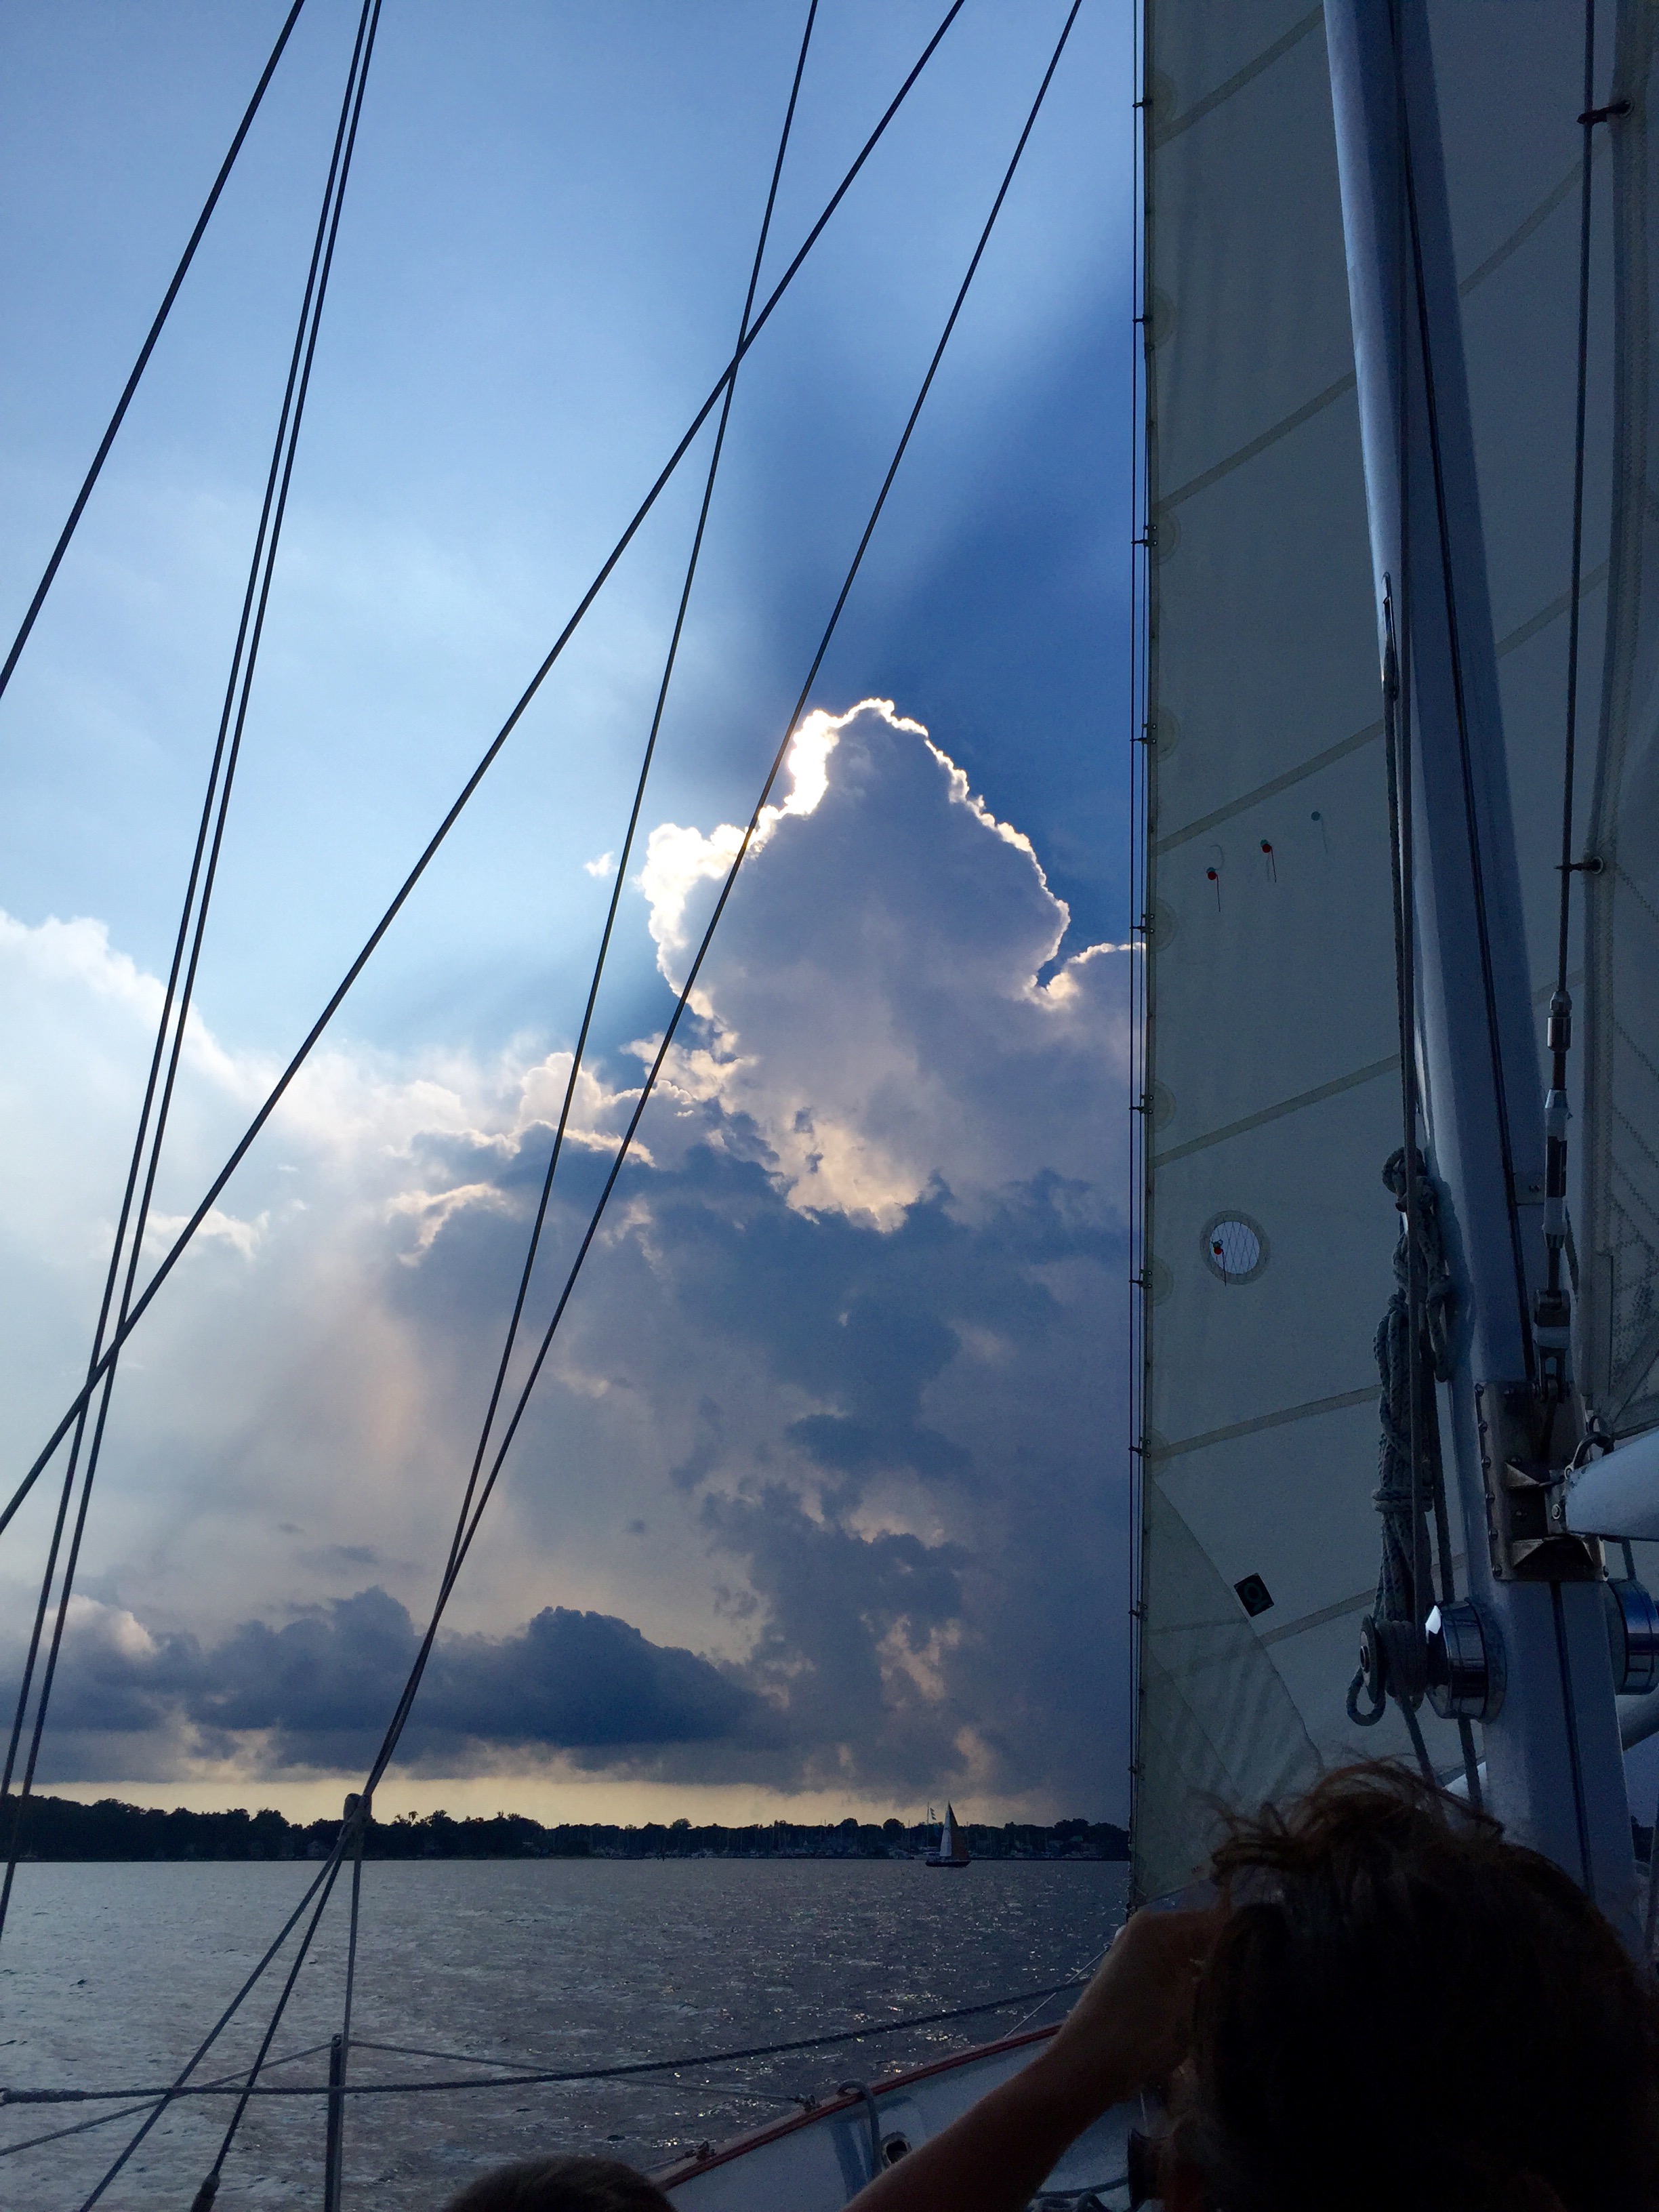 Dark cloud with sun peering out over it looking through sails